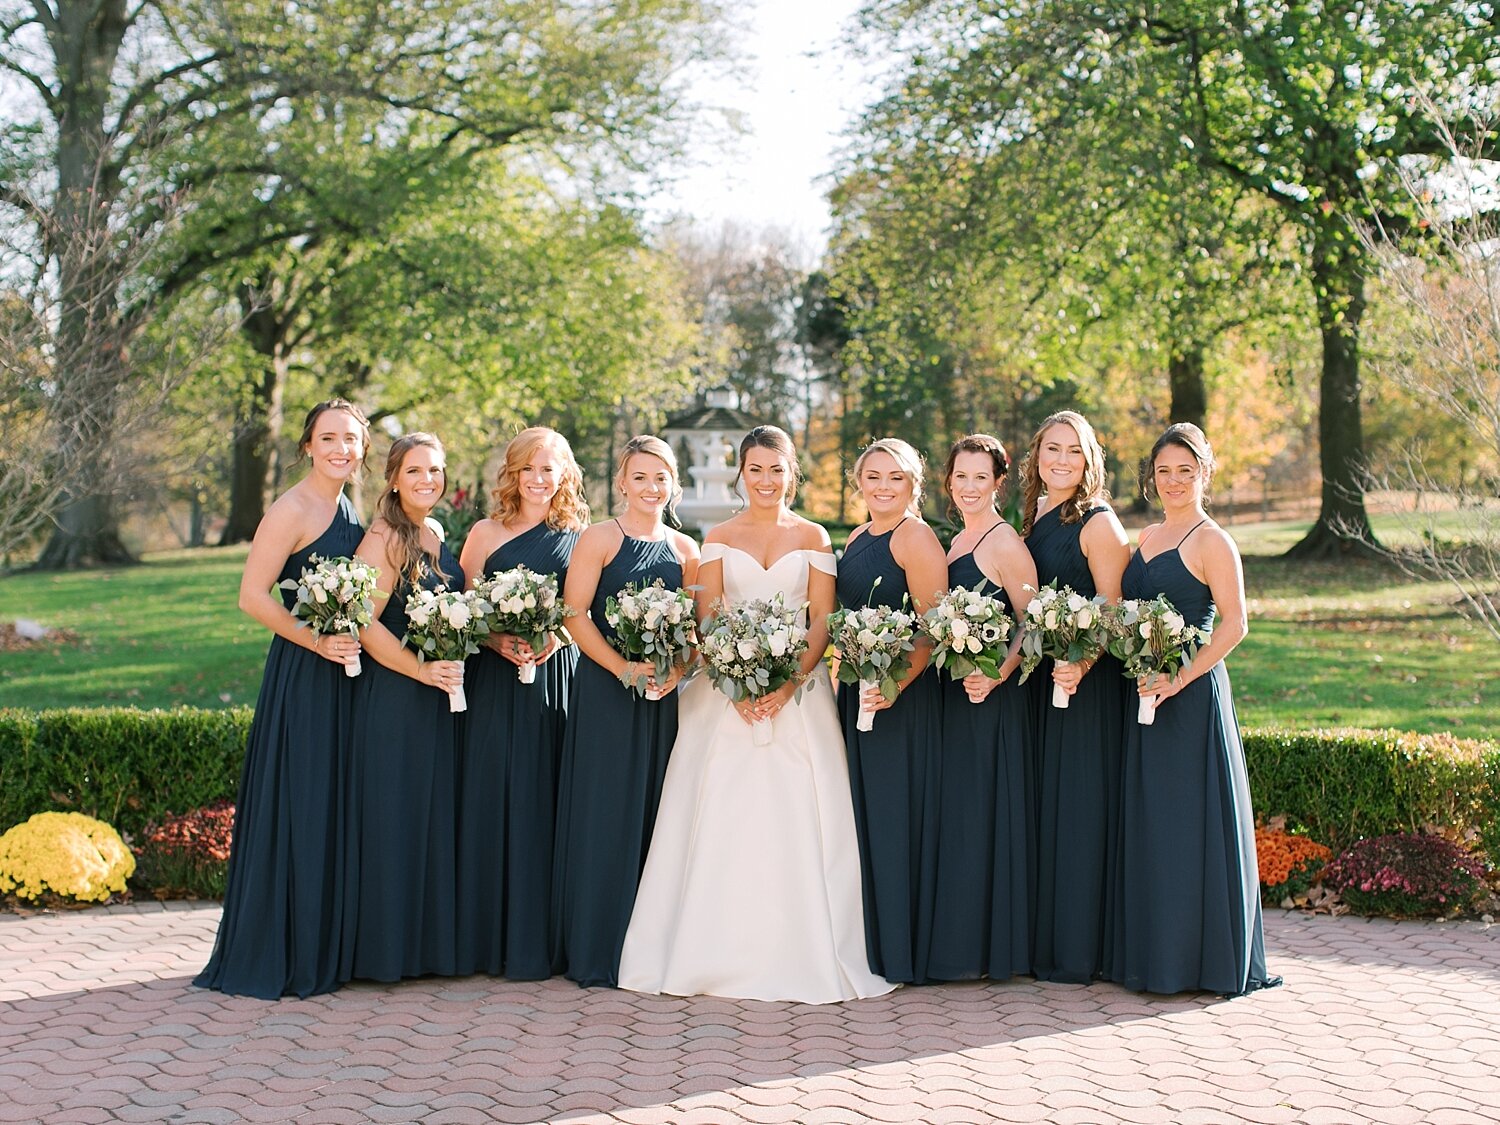 green bridesmaids dresses photographed by Asher Gardner Photography